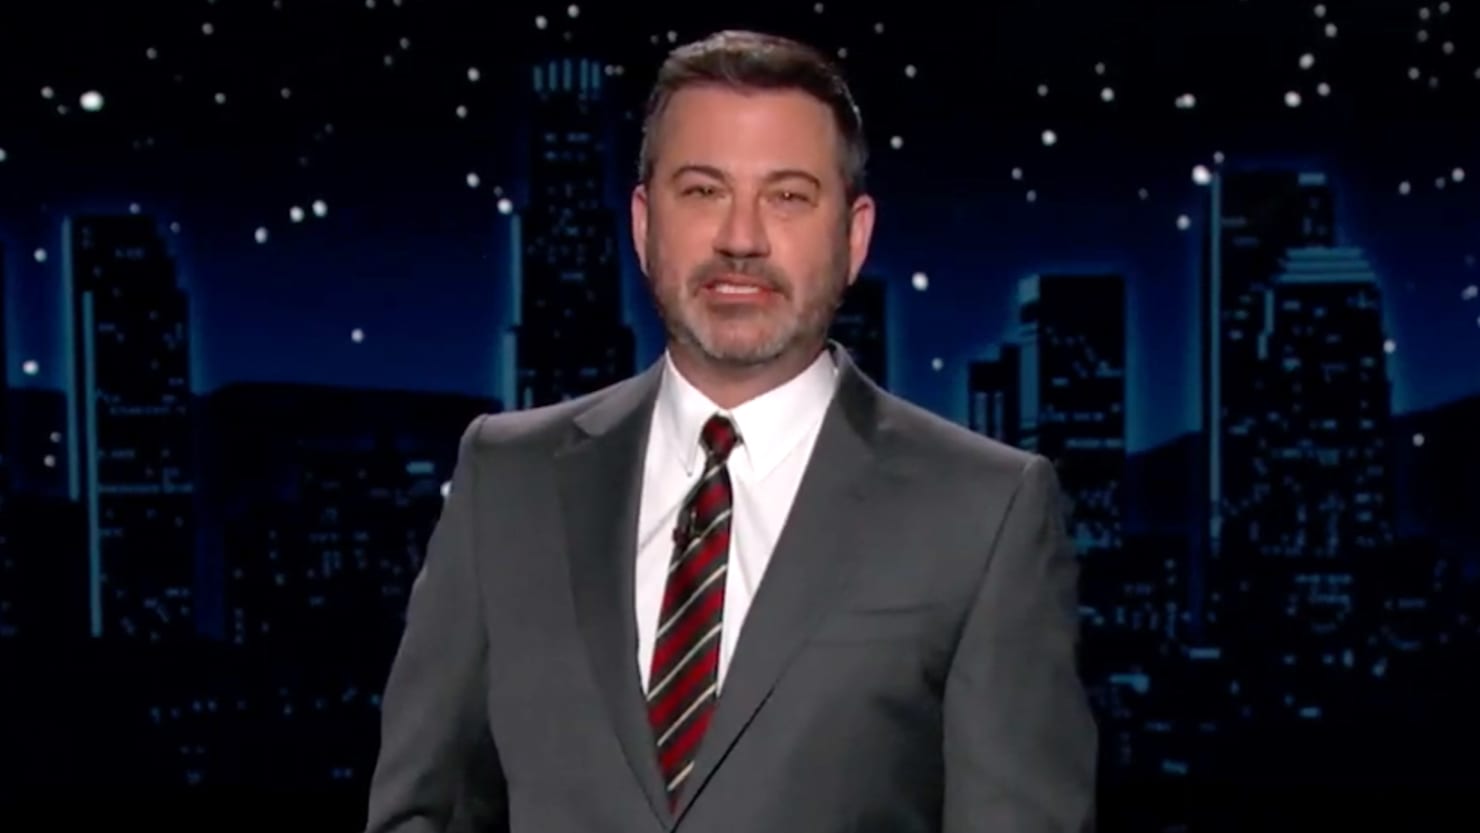 Jimmy Kimmel downloads on Mitch McConnell and says you blew it with Trump